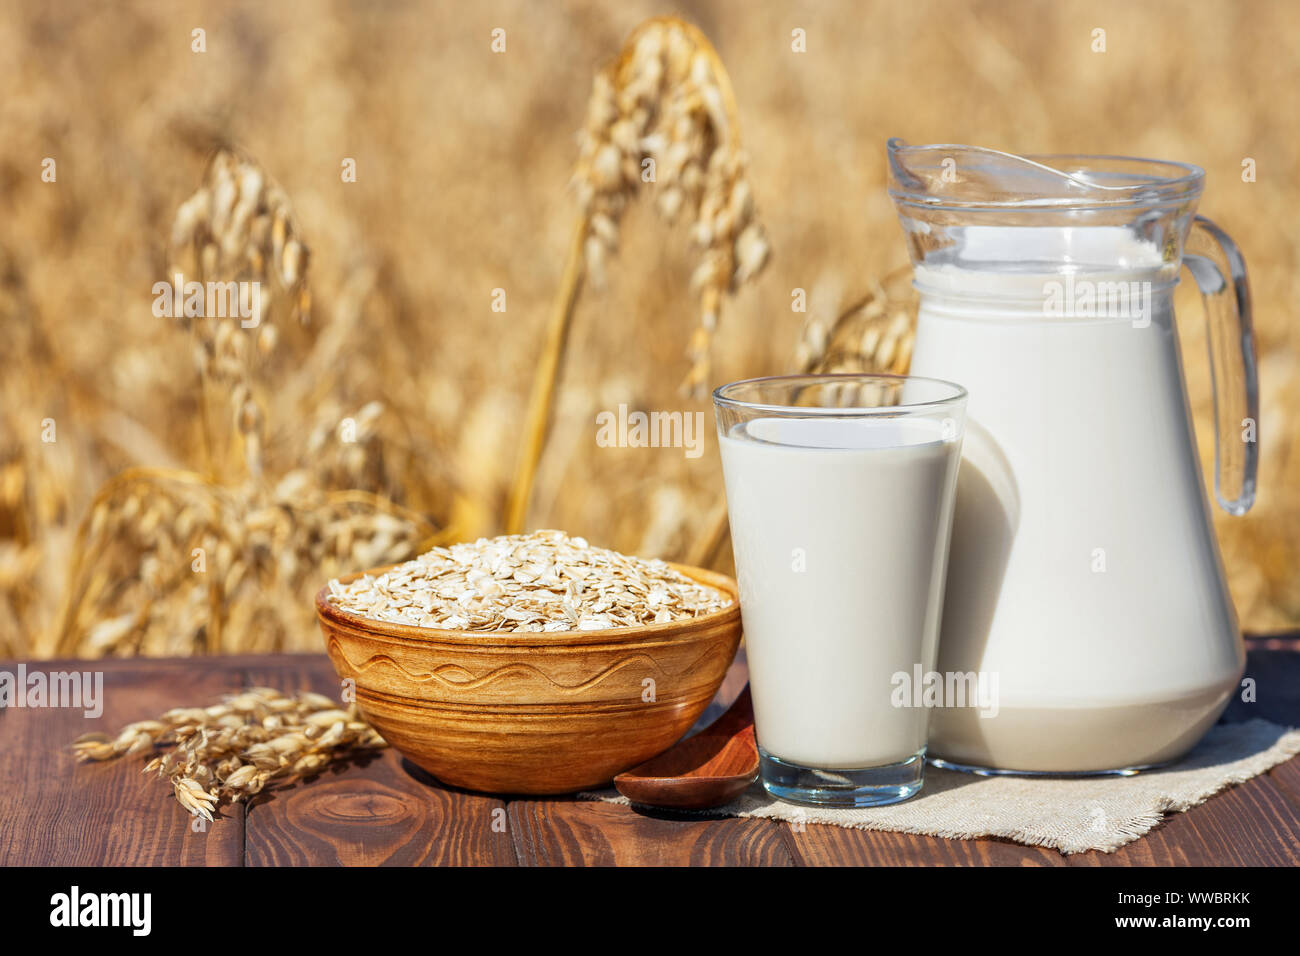 vegan oat milk in glass and jug with uncooked oatmeal in bowl on table over against ripe cereal field Stock Photo